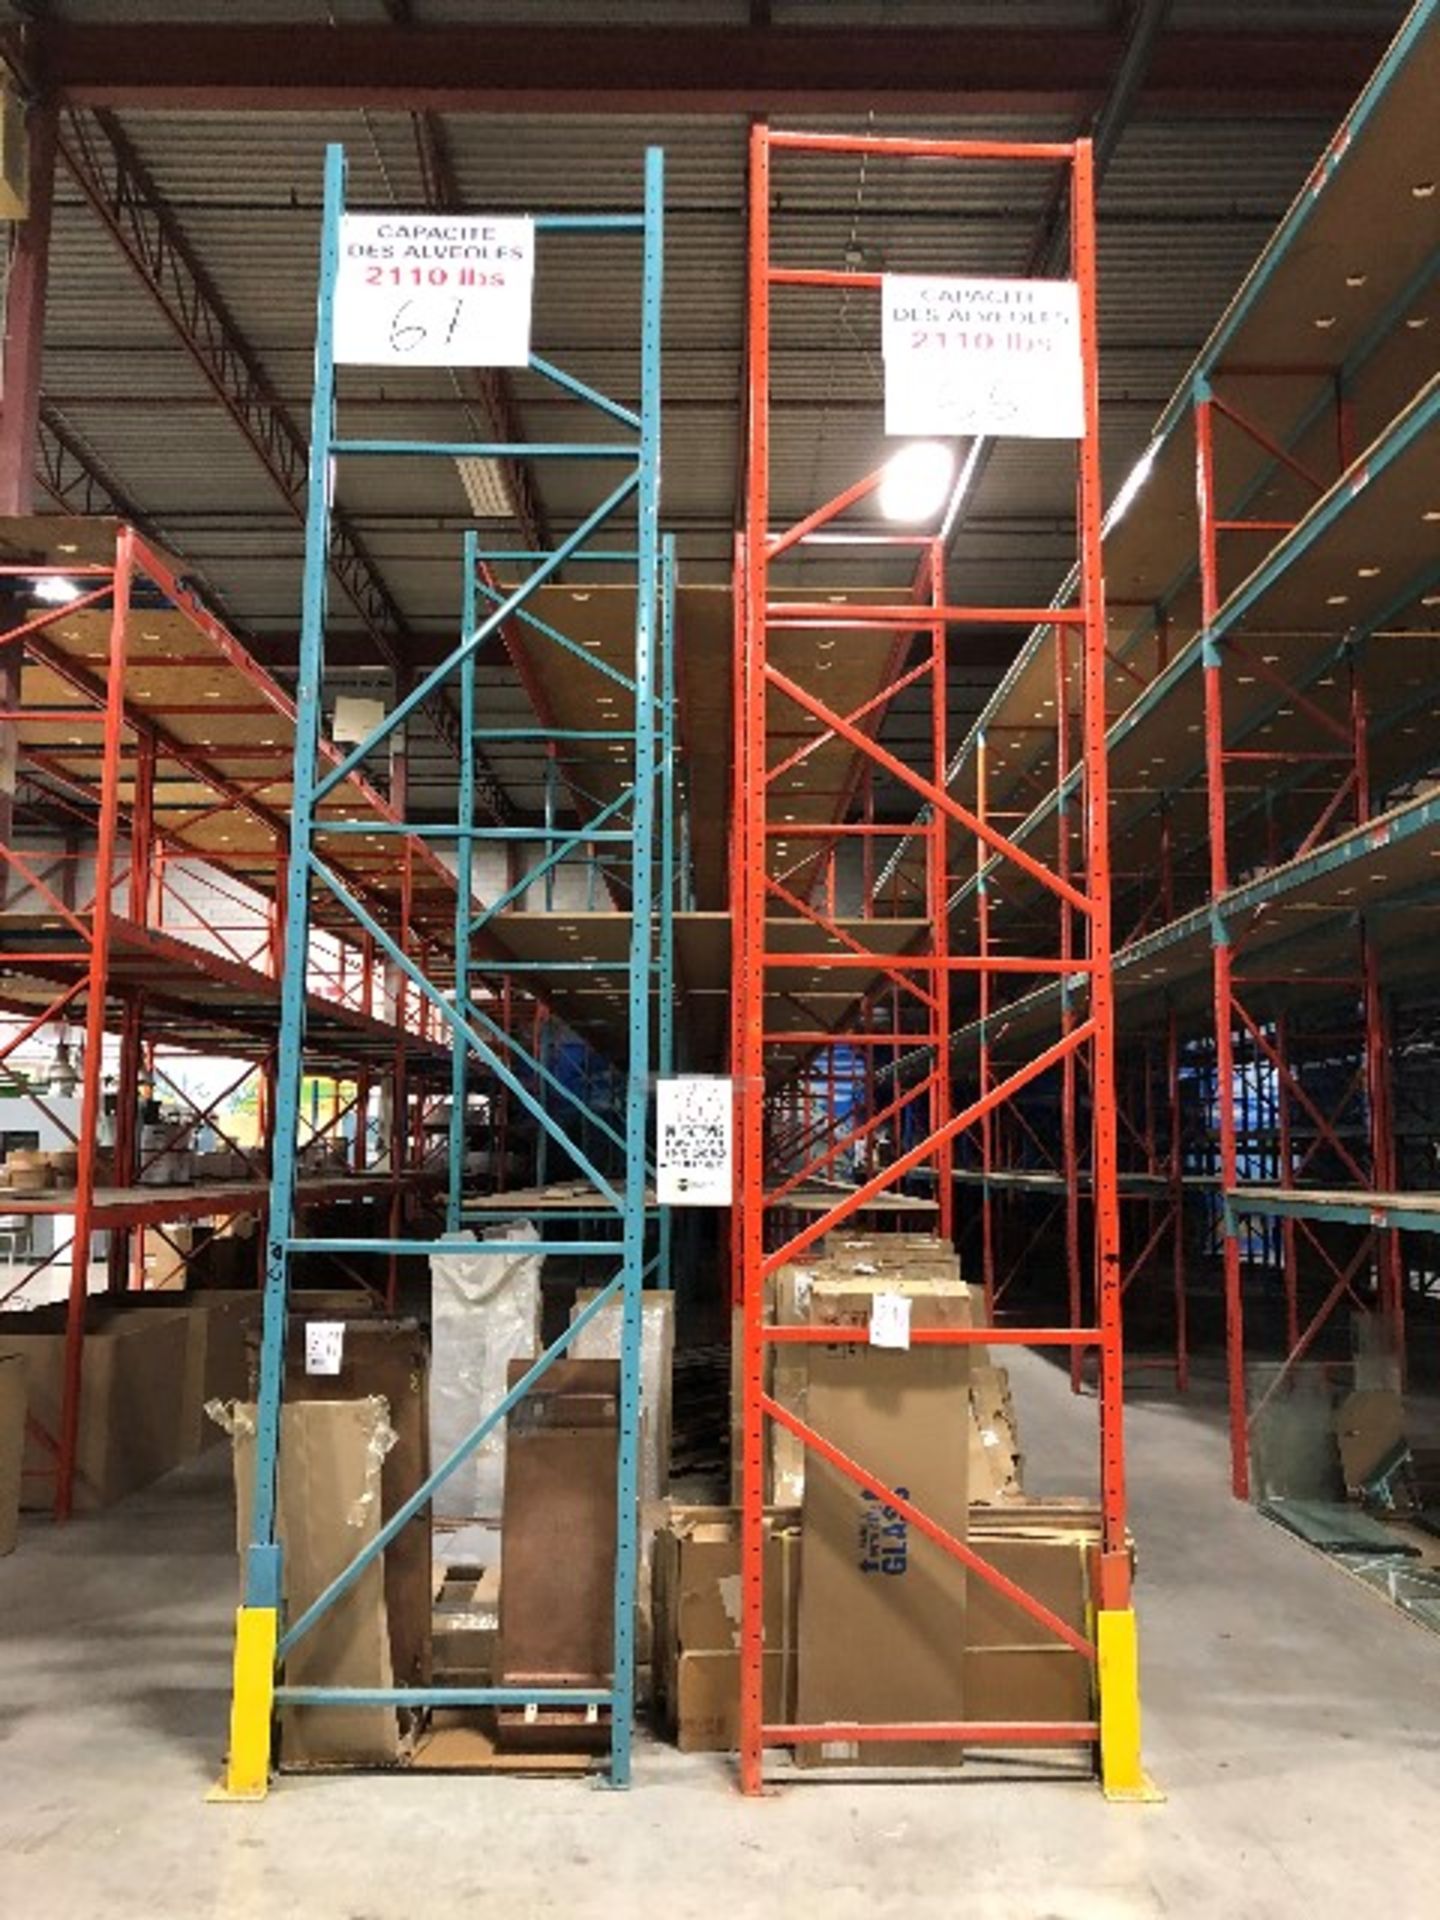 Pallet racking: H.16'xW.42”,72pcs 12'long bars w/54 MDF sheets,14 sections